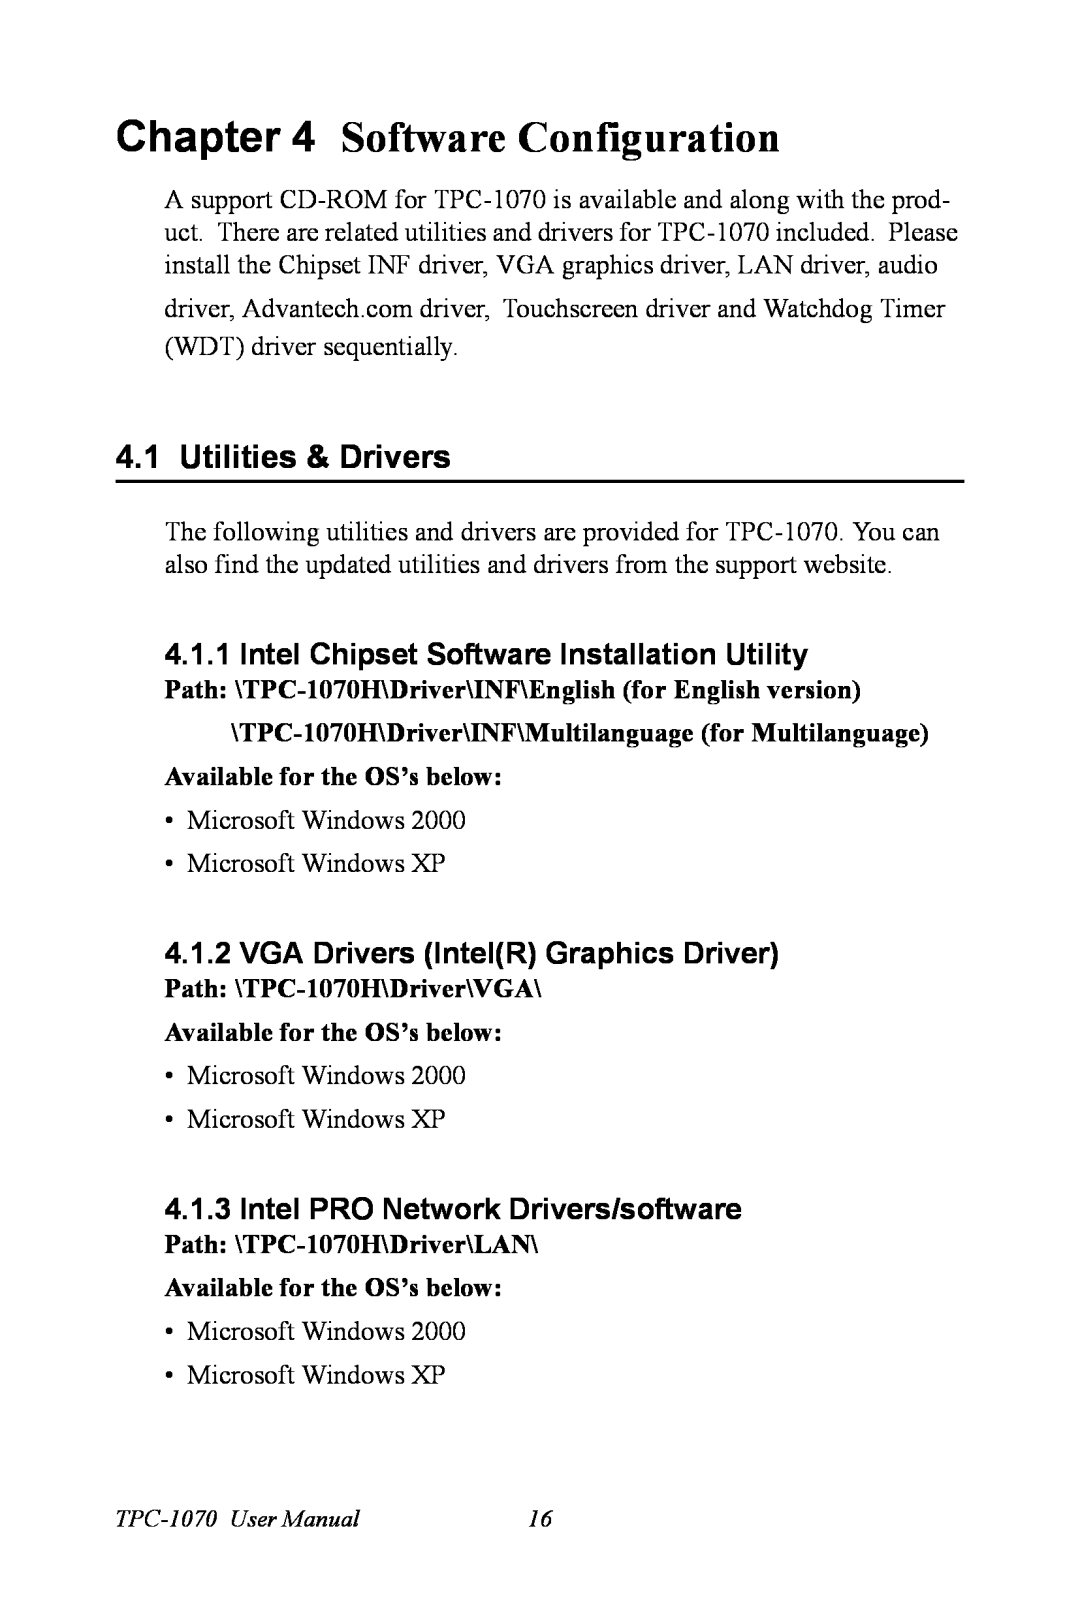 Intel TPC-1070 user manual Utilities & Drivers, Software Configuration, Intel Chipset Software Installation Utility 